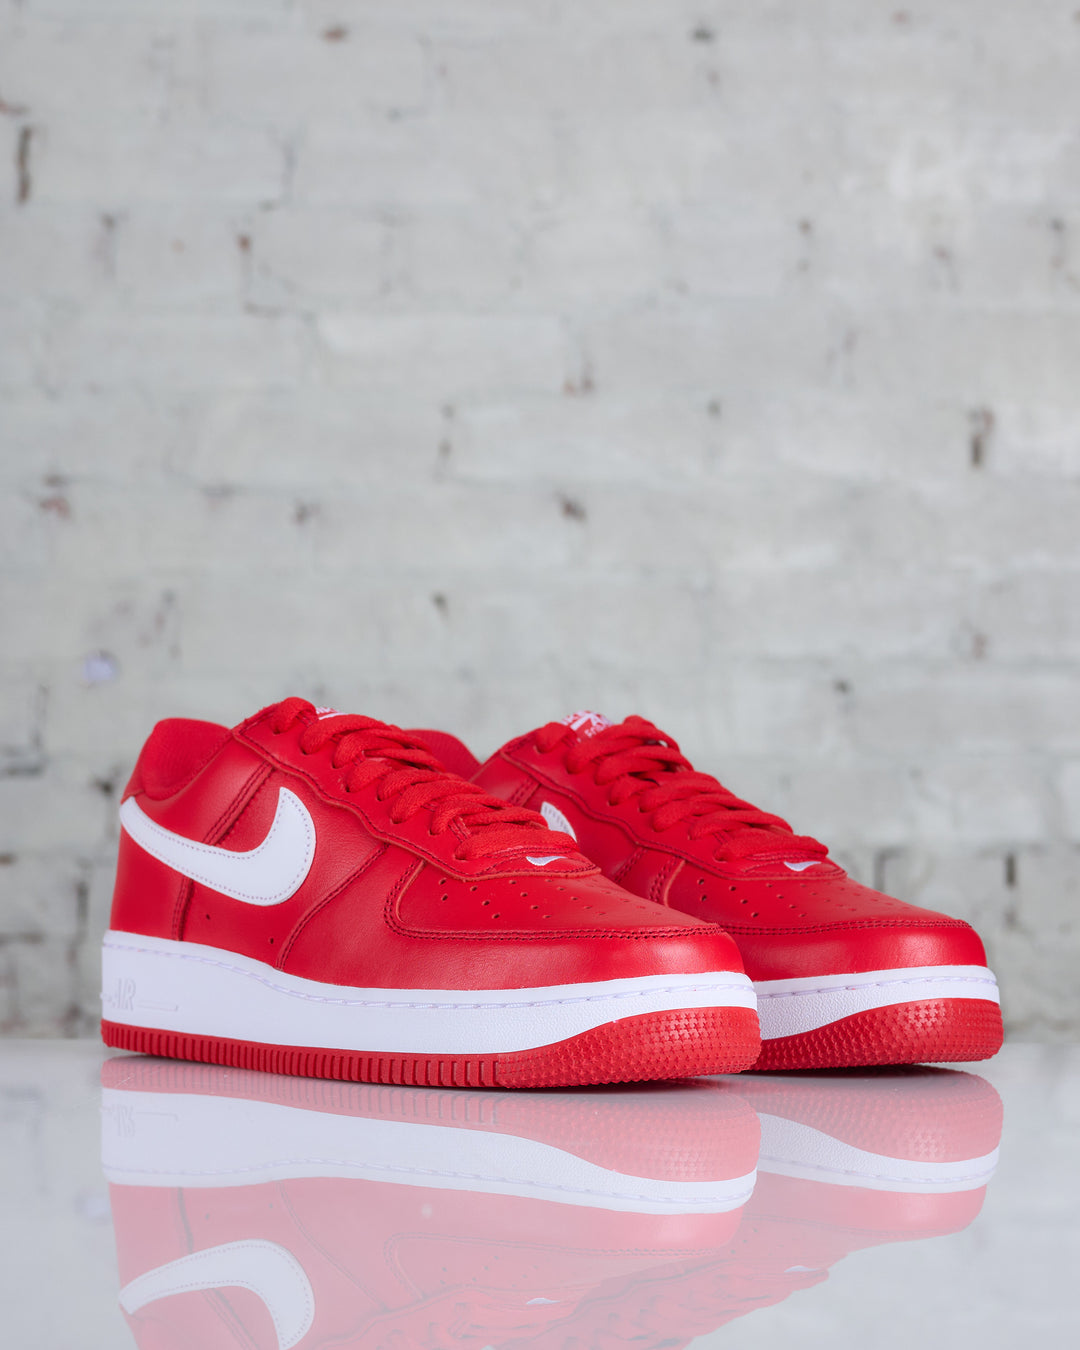 Nike Air Force 1 Low Retro 'University Red/White